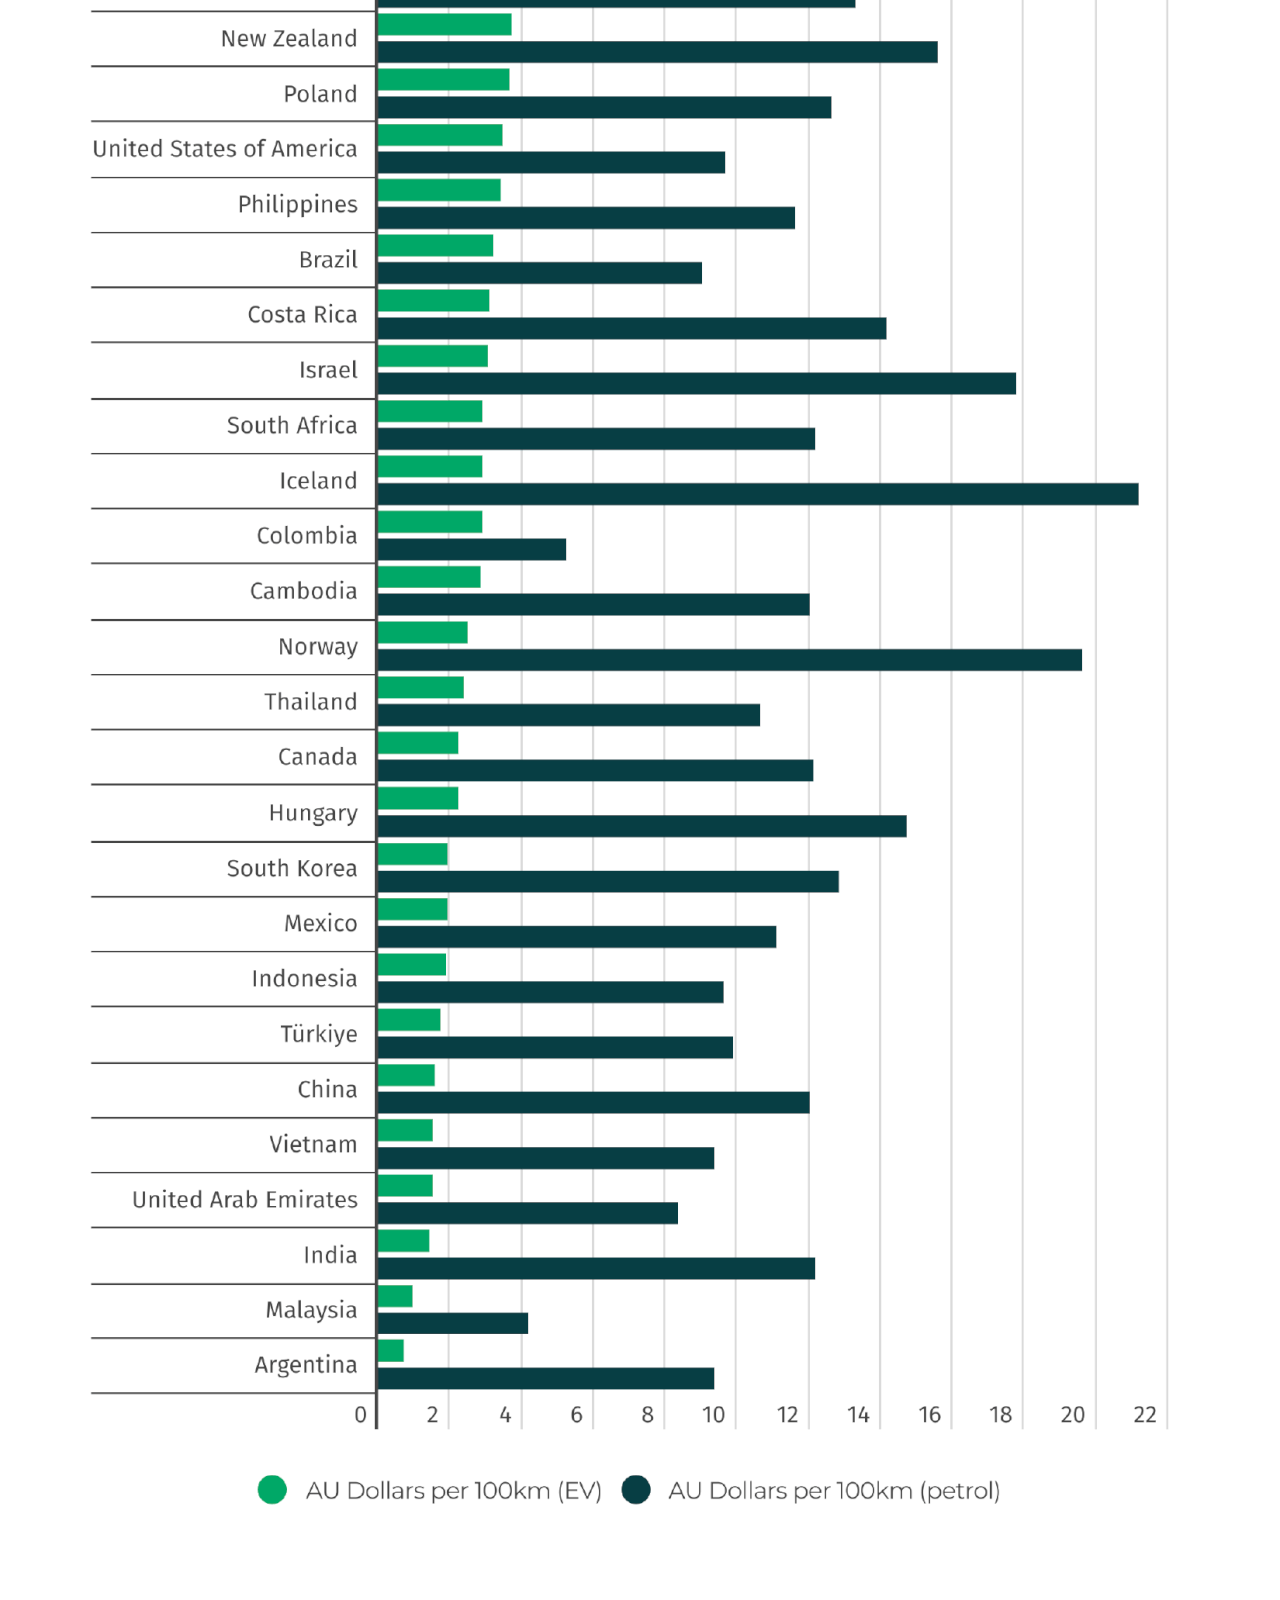 Table showing the price per 100km to drive an electric vs petrol powered vehicle, in Australian Dollars.